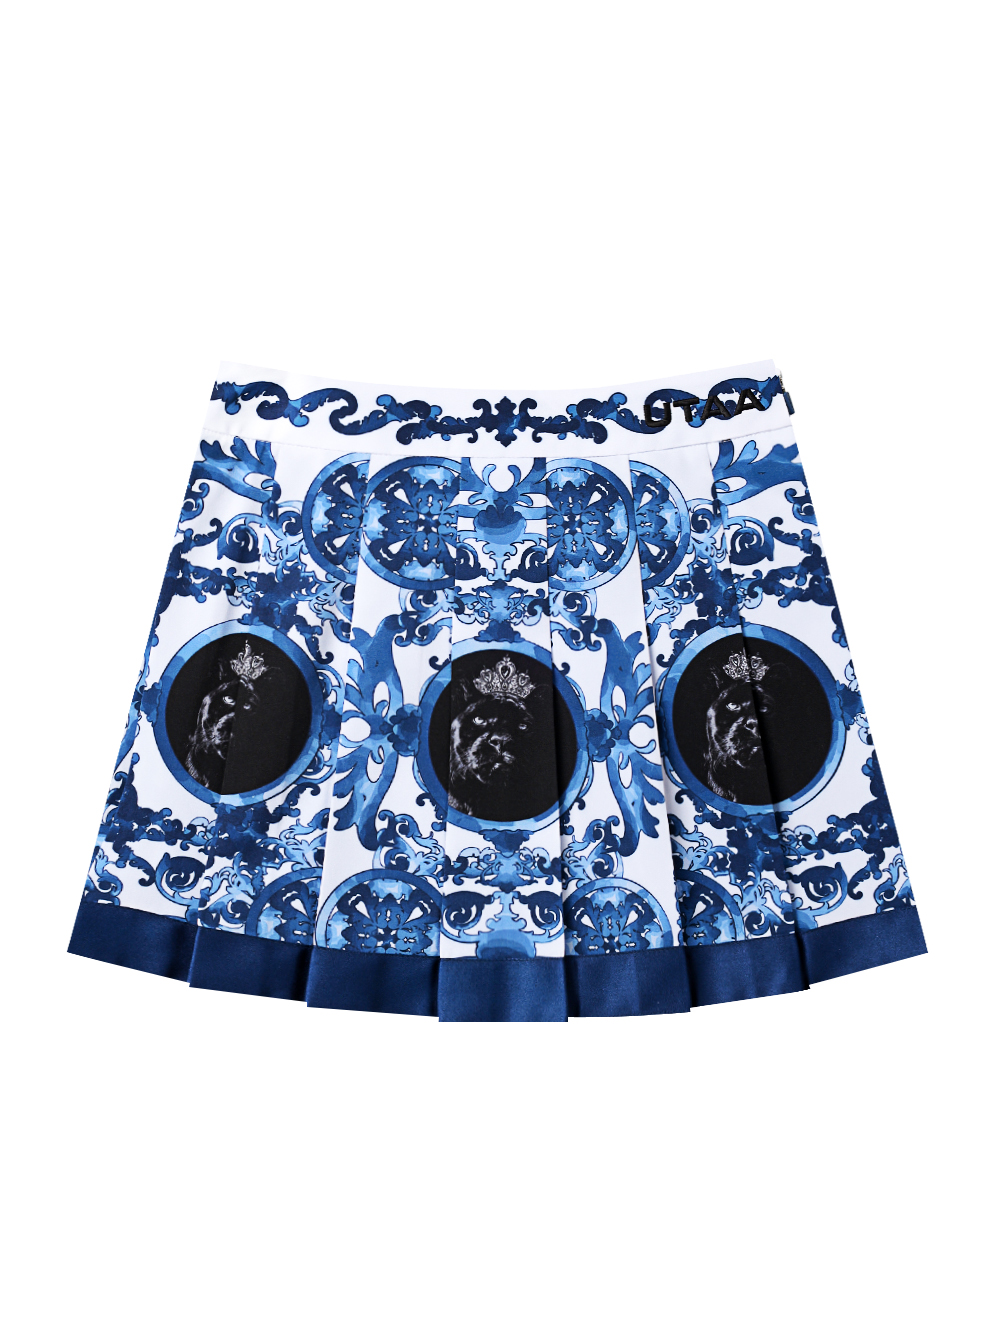 UTAA Sequence Baroque Graphic Pleats Skirt : Blue (UD2SKF495BL)